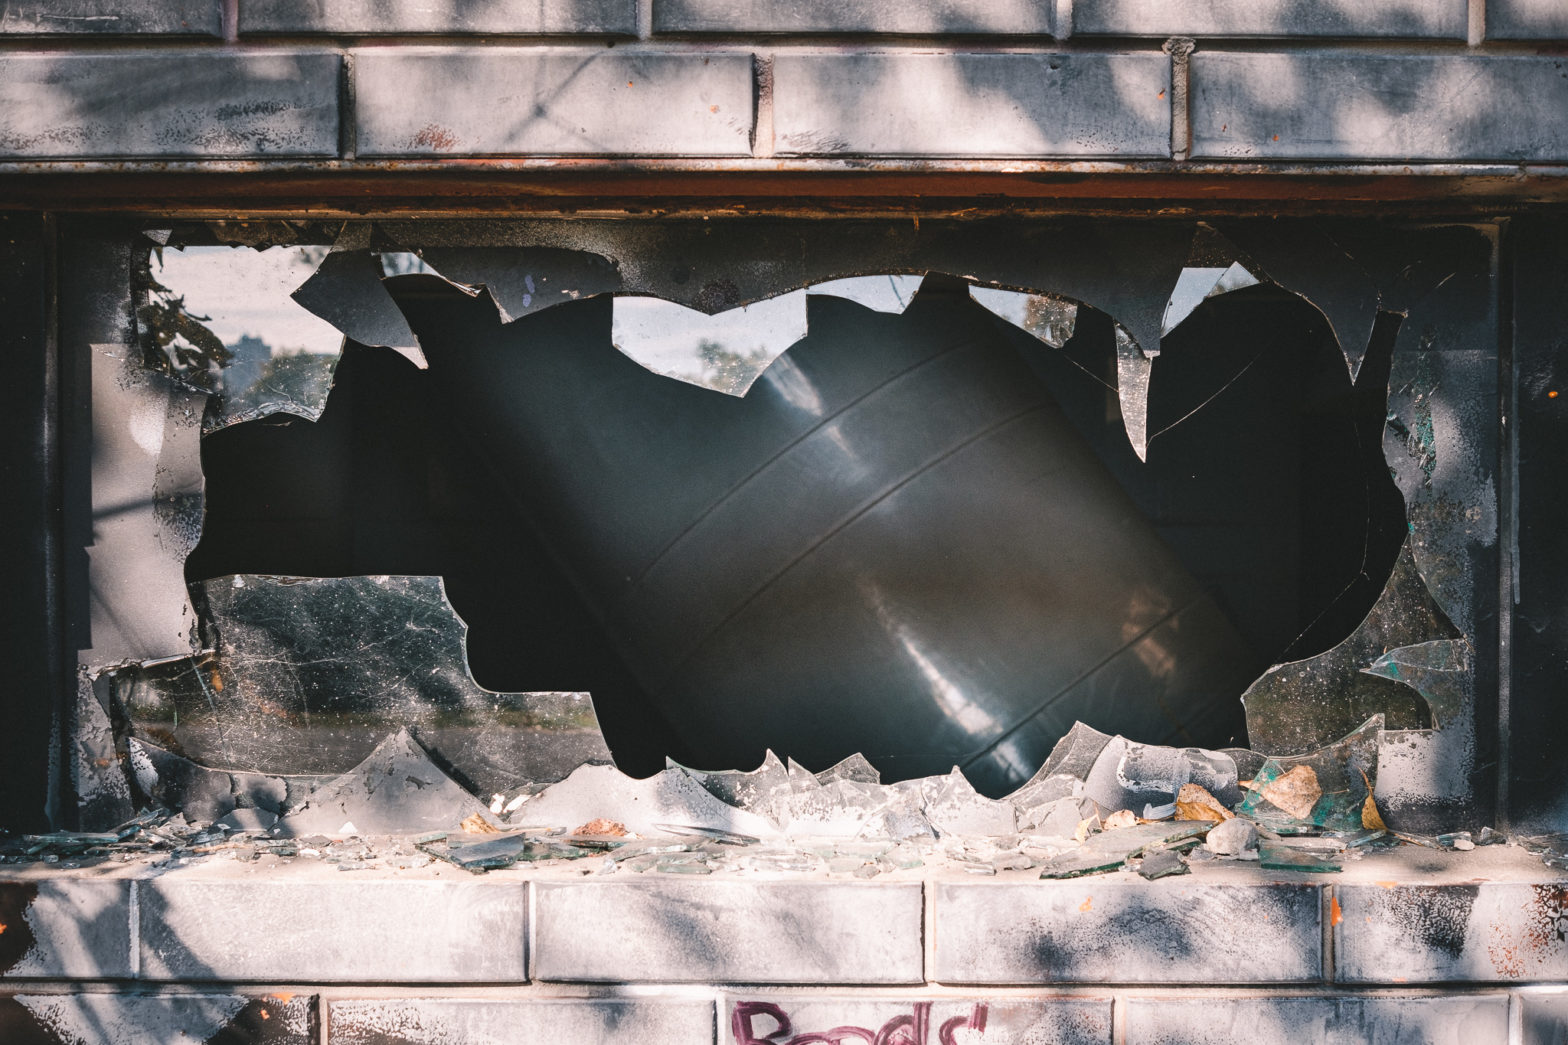 A large pipe running diagonally across the room visible through a broken window with jagged shards of glass framing the view